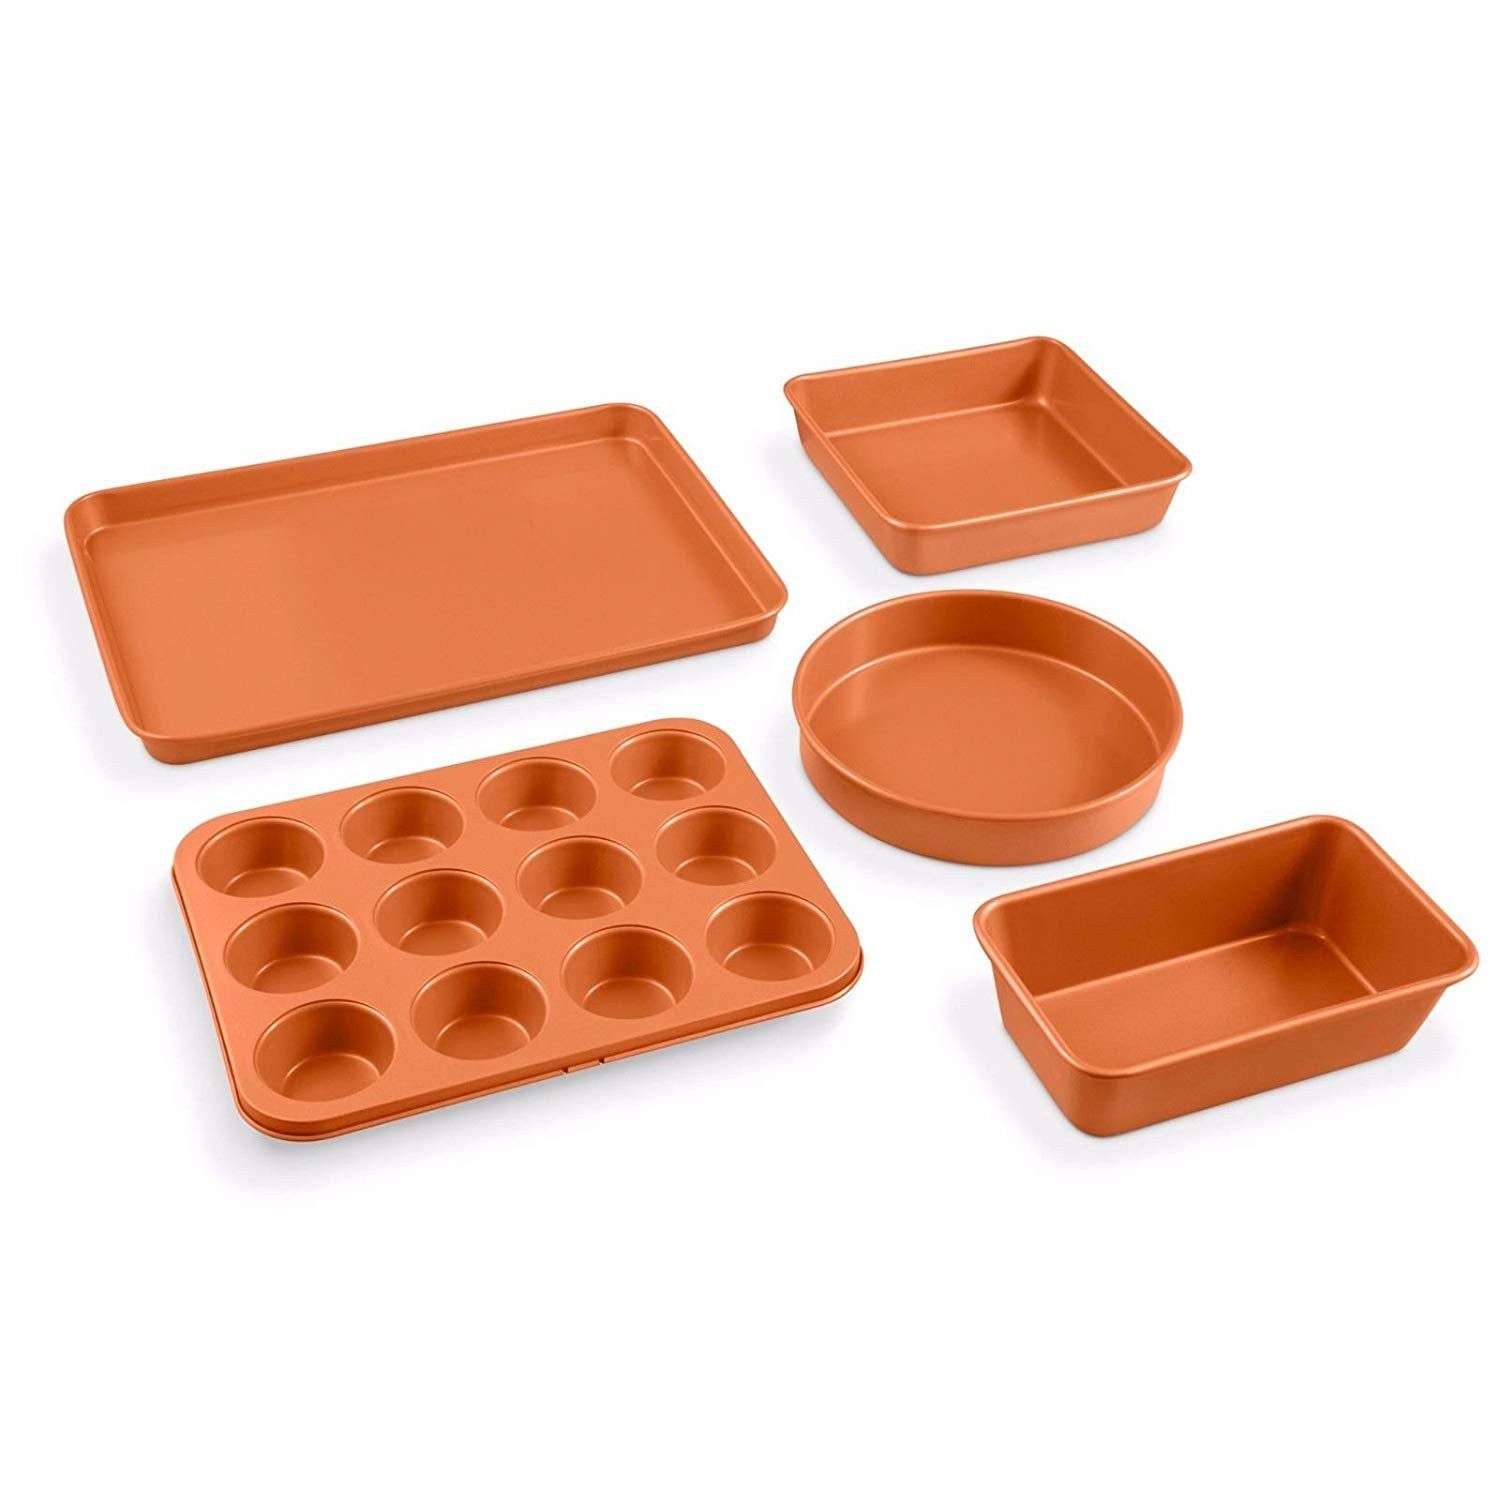 20 Piece All in One Kitchen Cookware + Bakeware Set with Nonstick Durable Ceramic Copper Coating